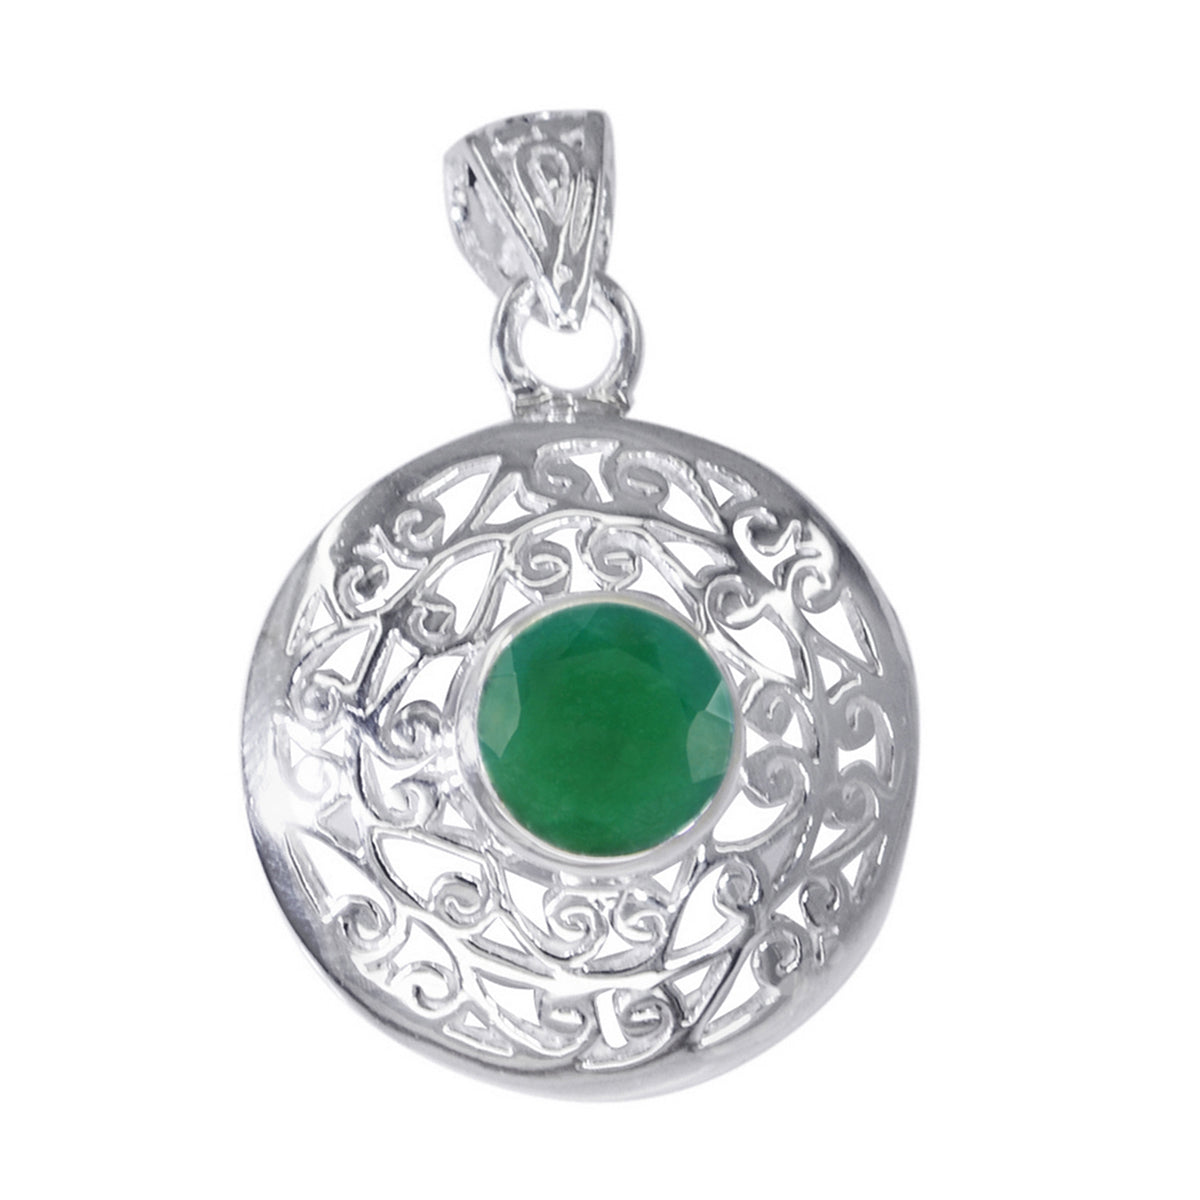 Riyo Fit Gems Round Faceted Green Indian Emerald Solid Silver Pendant Gift For Anniversary